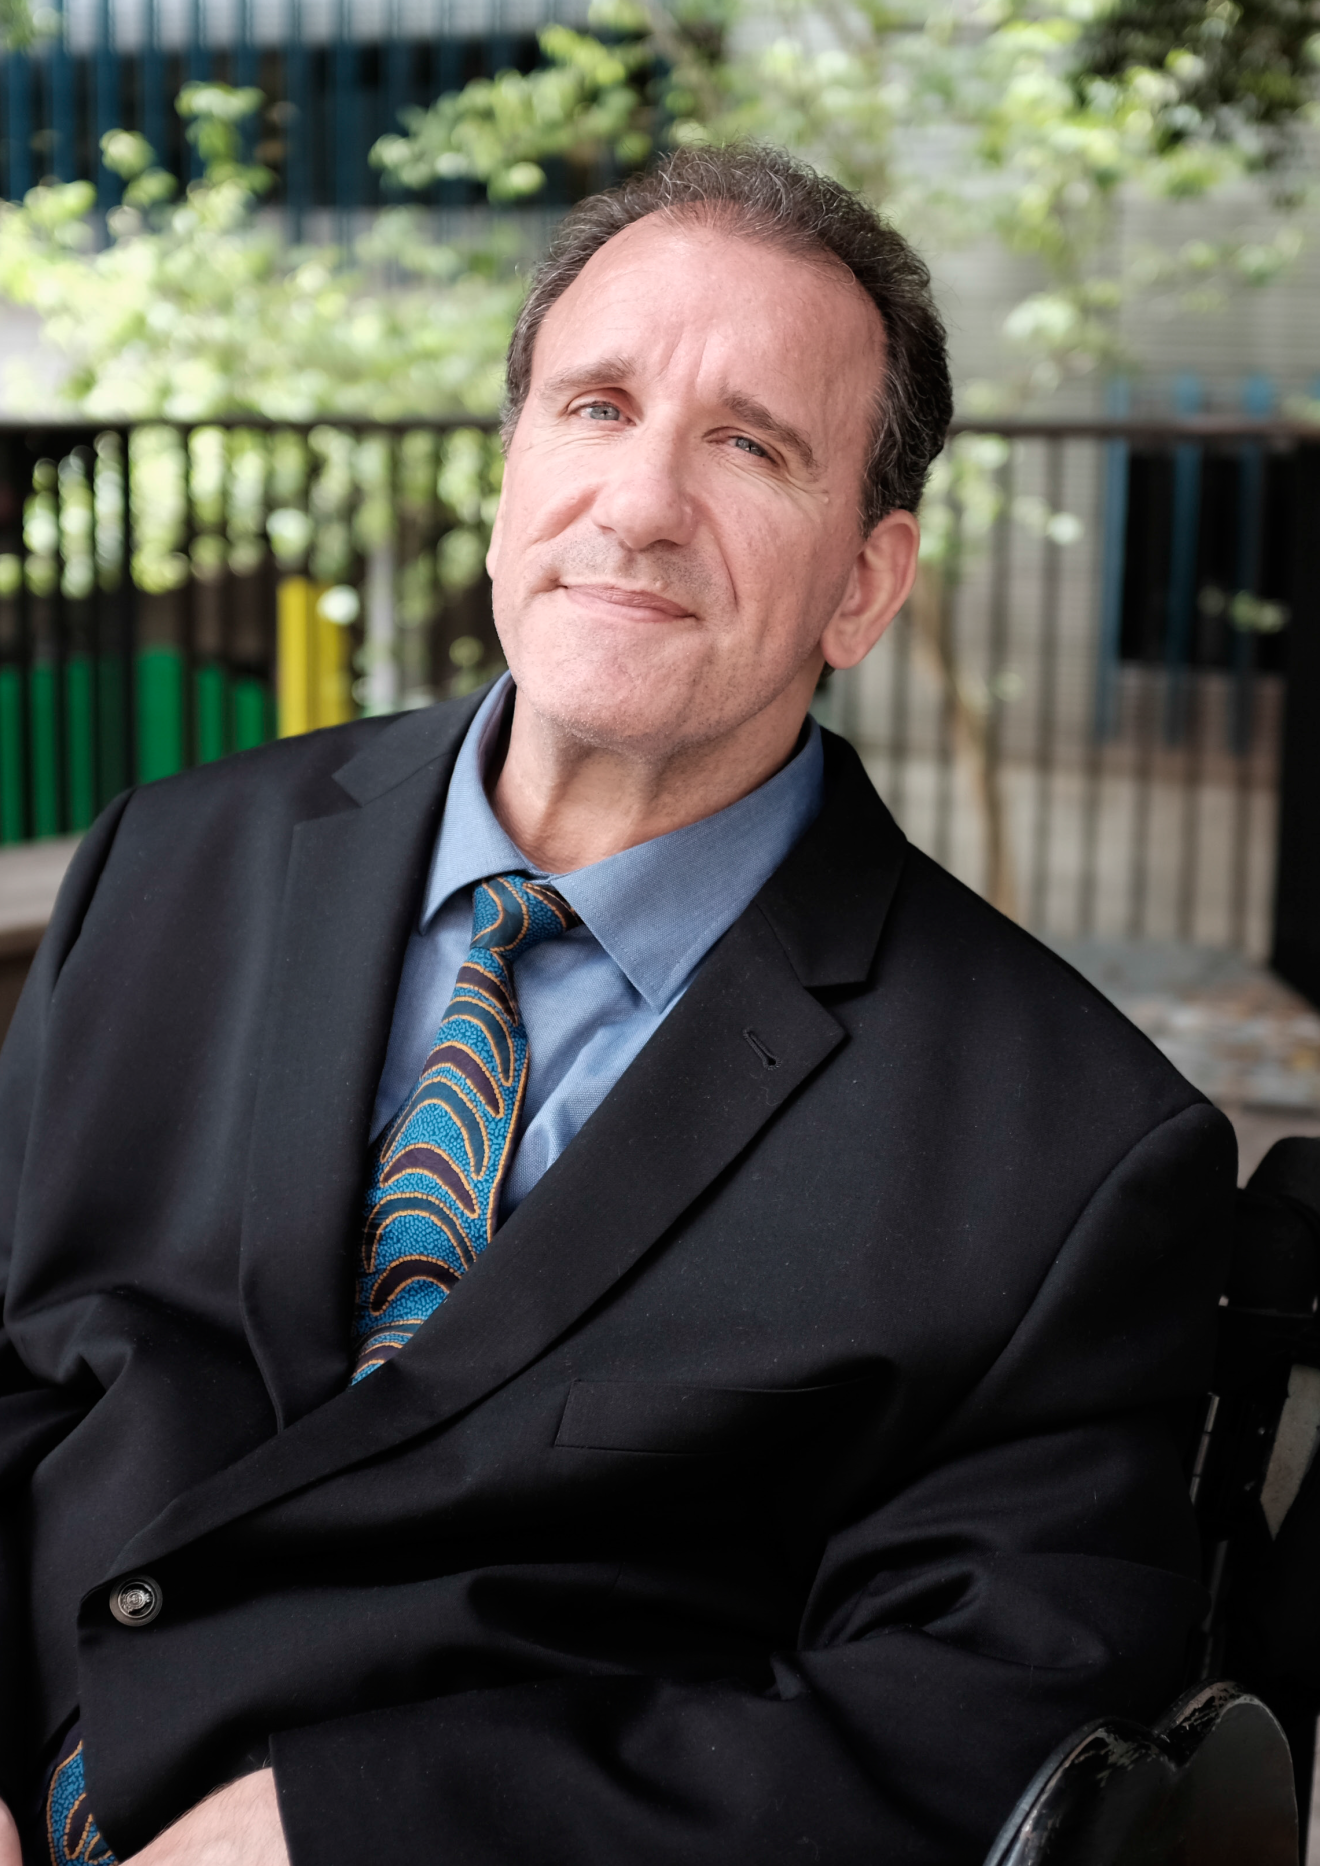 Simon Darcy, sitting, smiling, wearing a light blue button up shirt, a blue tie with brown shapes on it and a black blazer over the top.